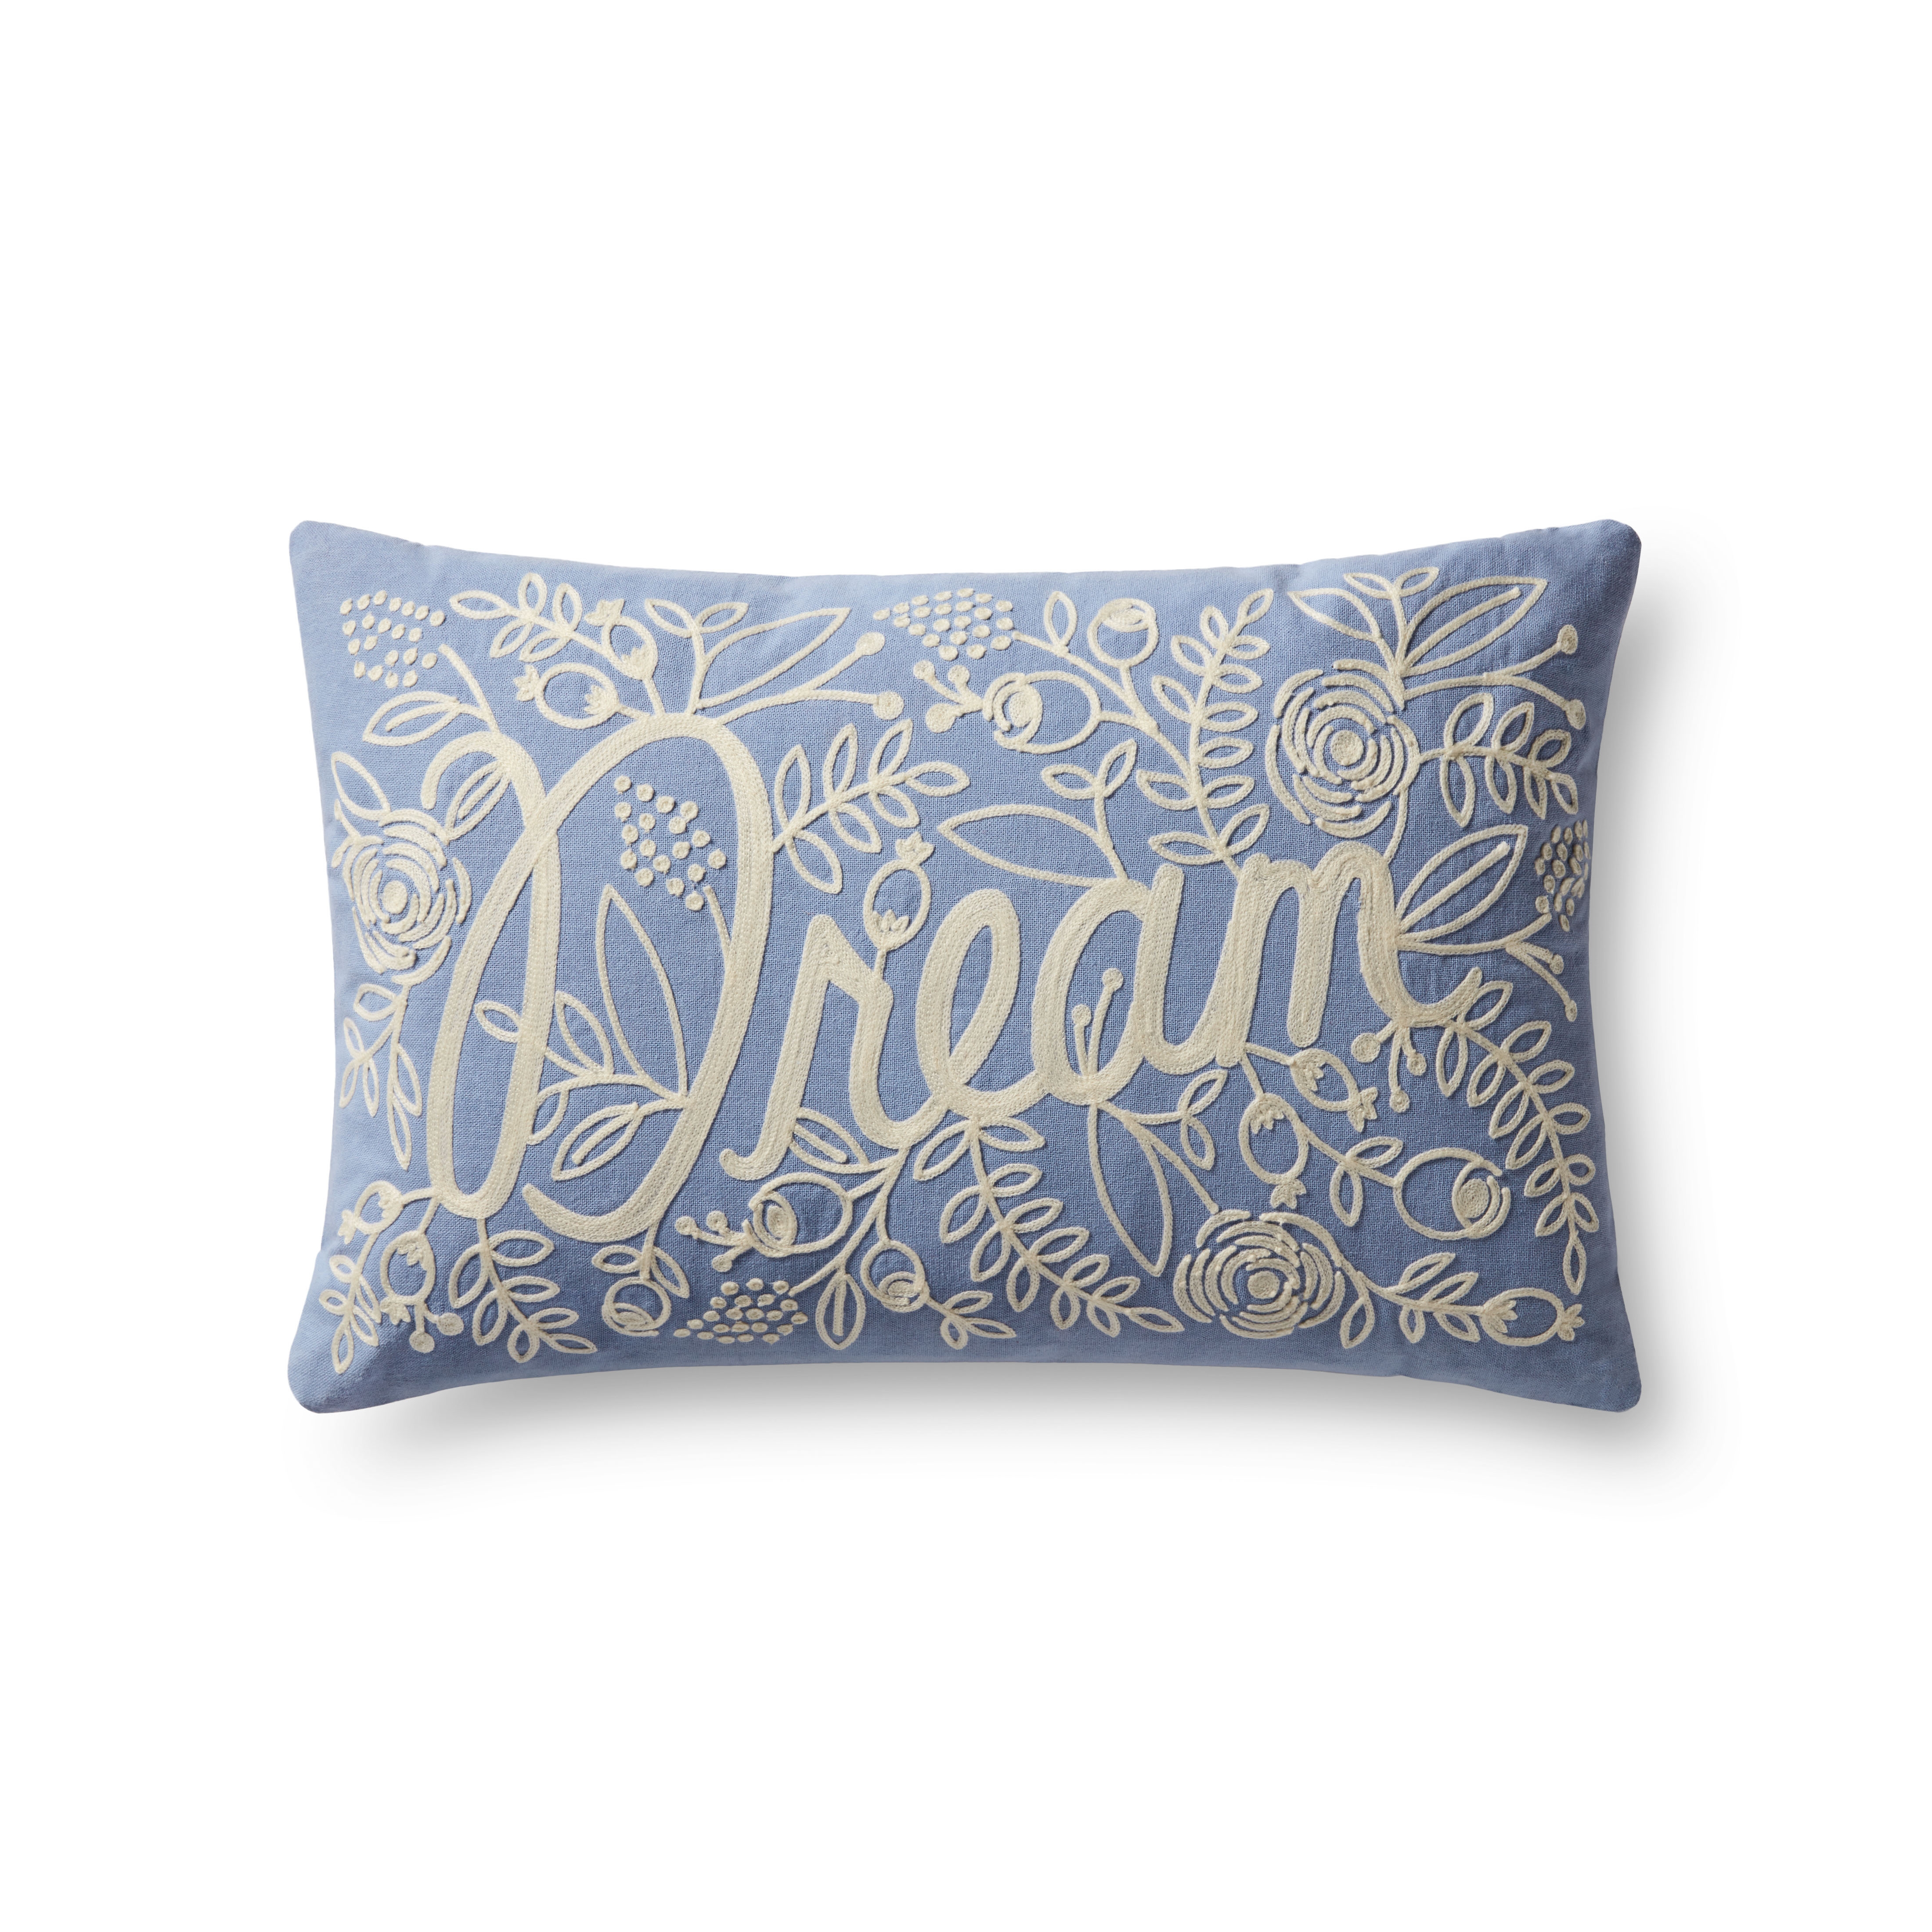 Rifle Paper Co. x Loloi Pillows P6077 Blue 13" x 21" Cover Only - Image 0